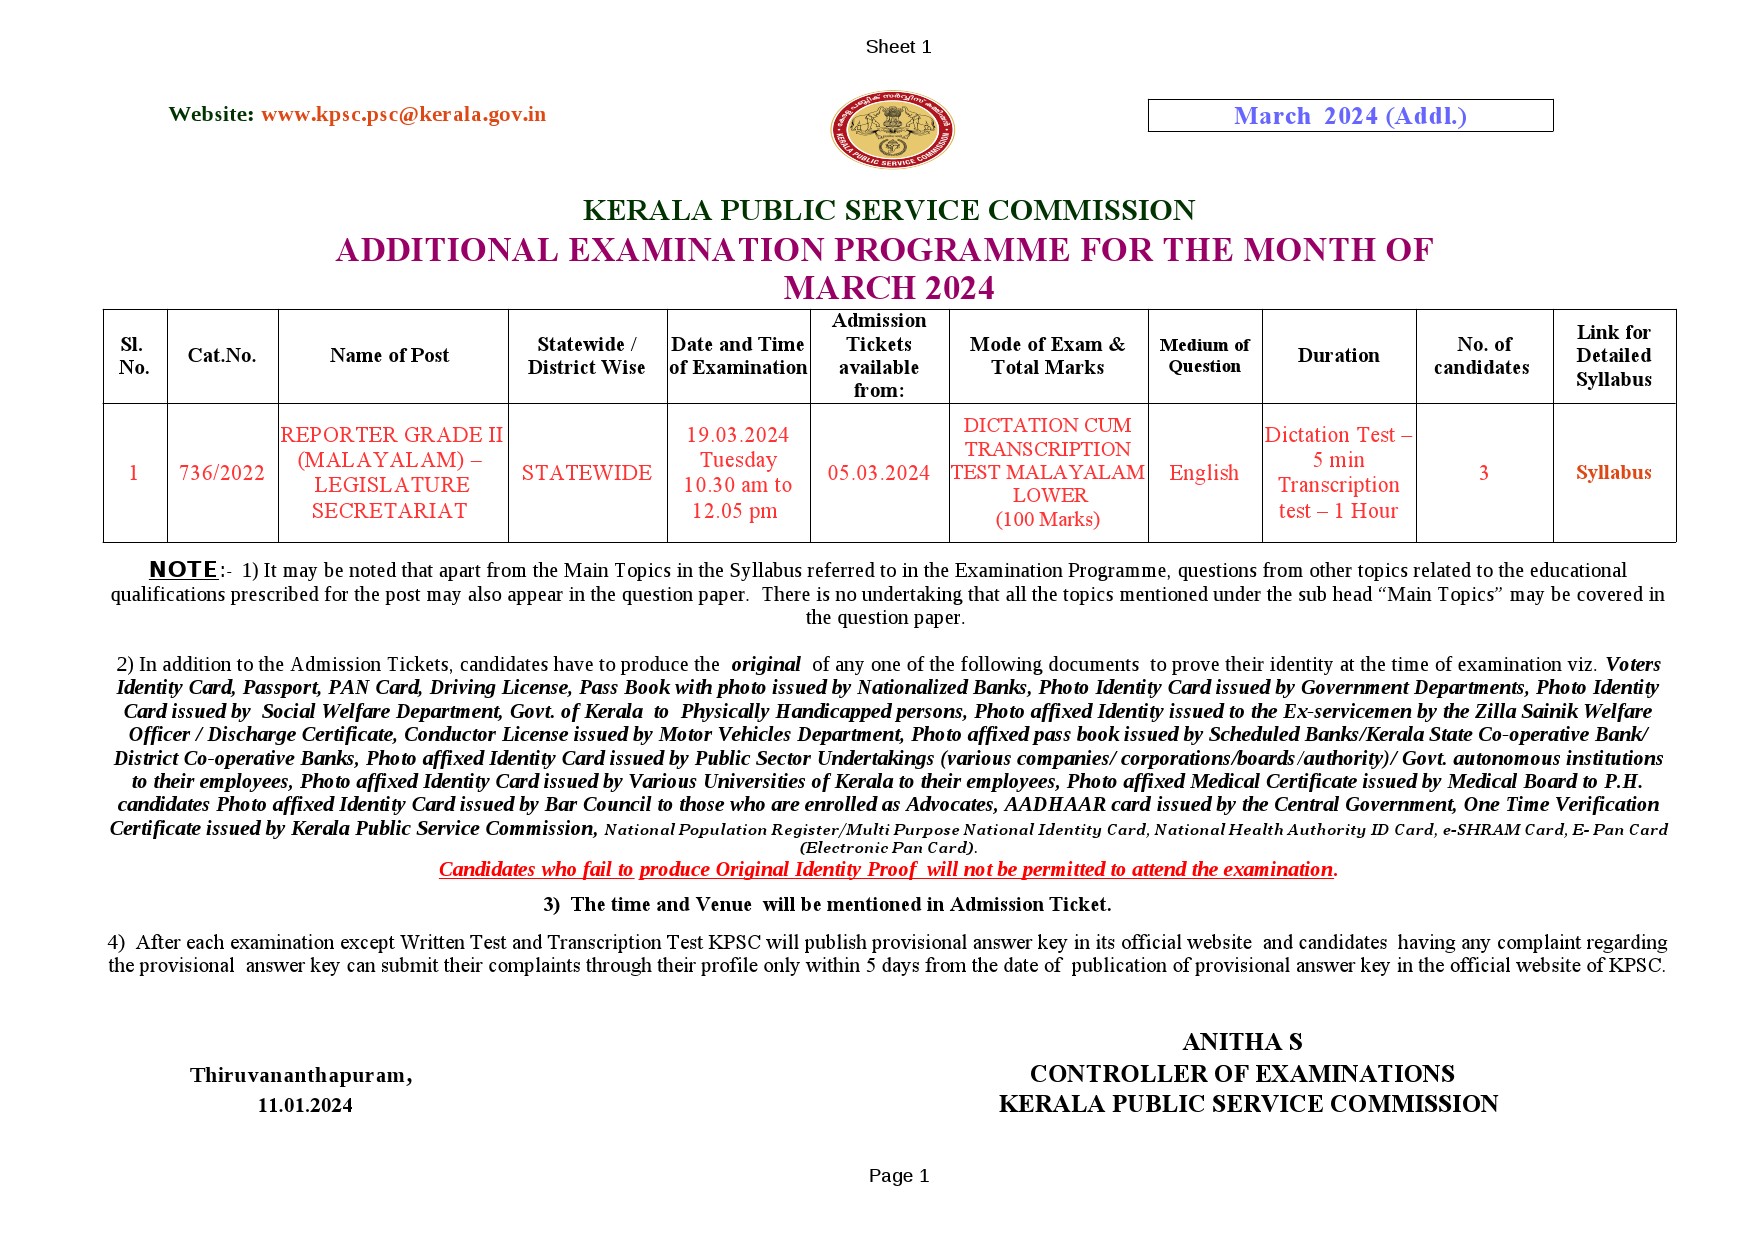 Examination Programme For The Month Of March 2024 - Notification Image 8